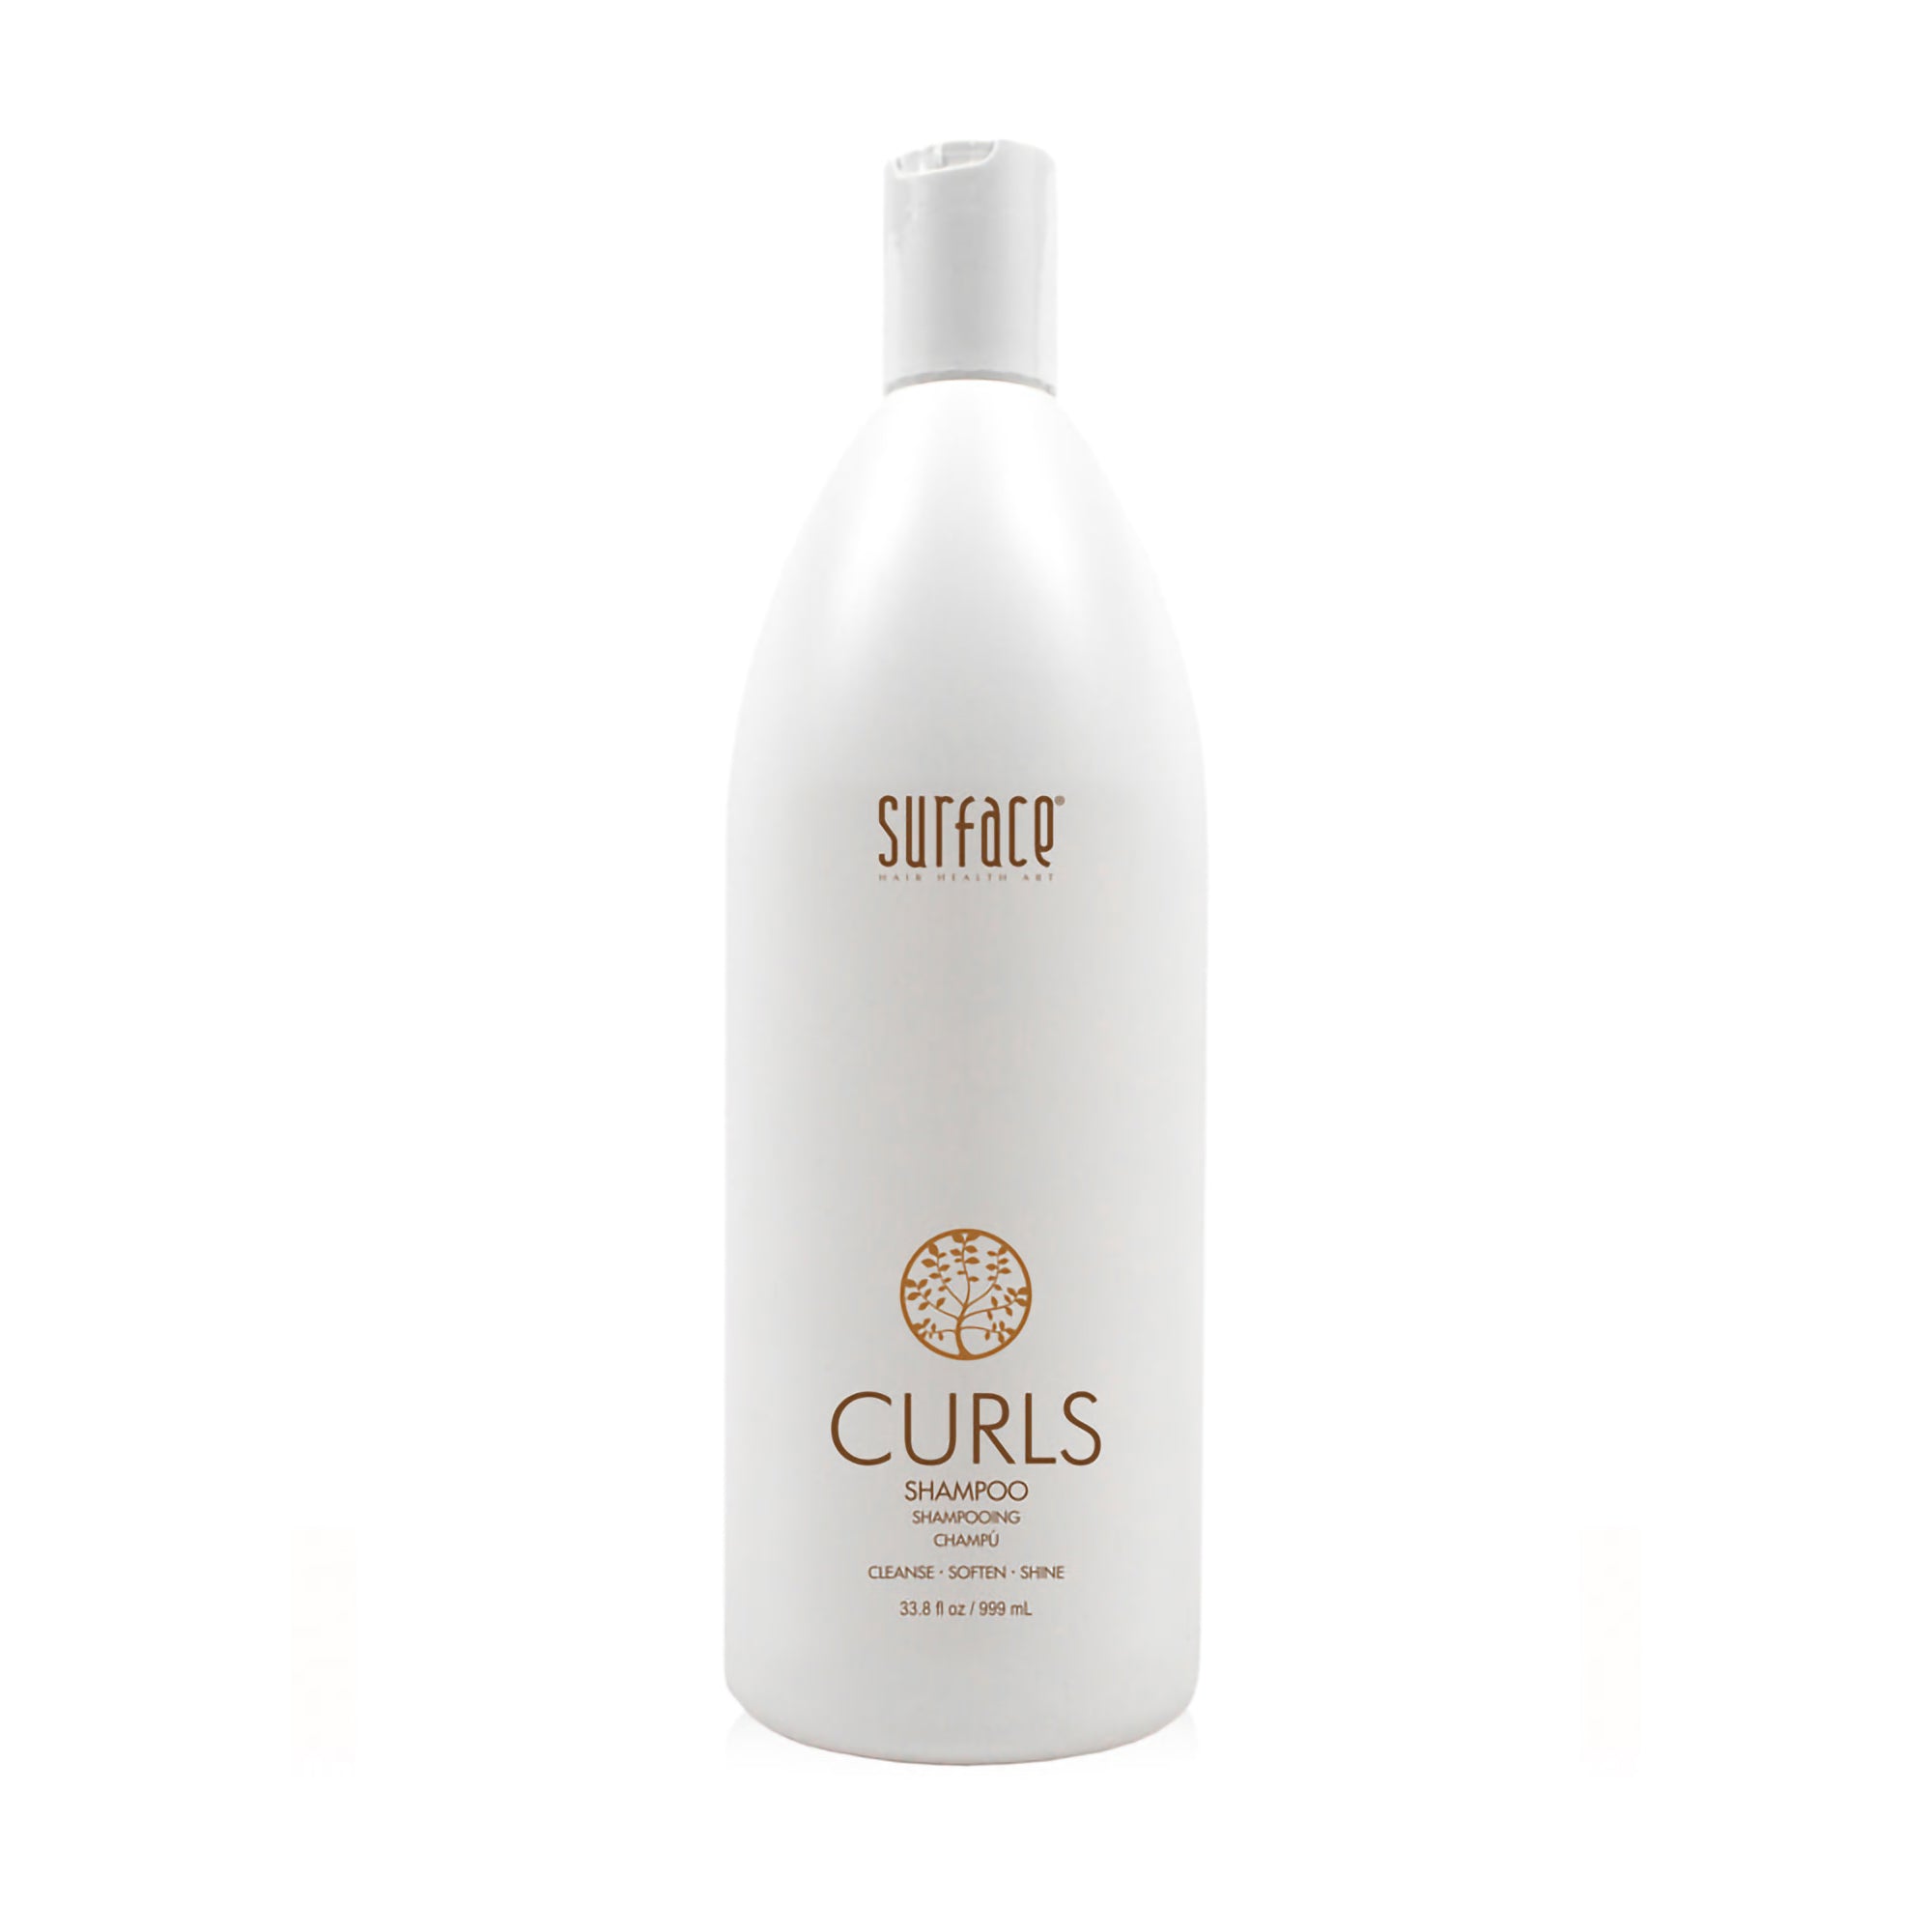 Surface Curls Shampoo and Conditioner Liter Duo / LITER